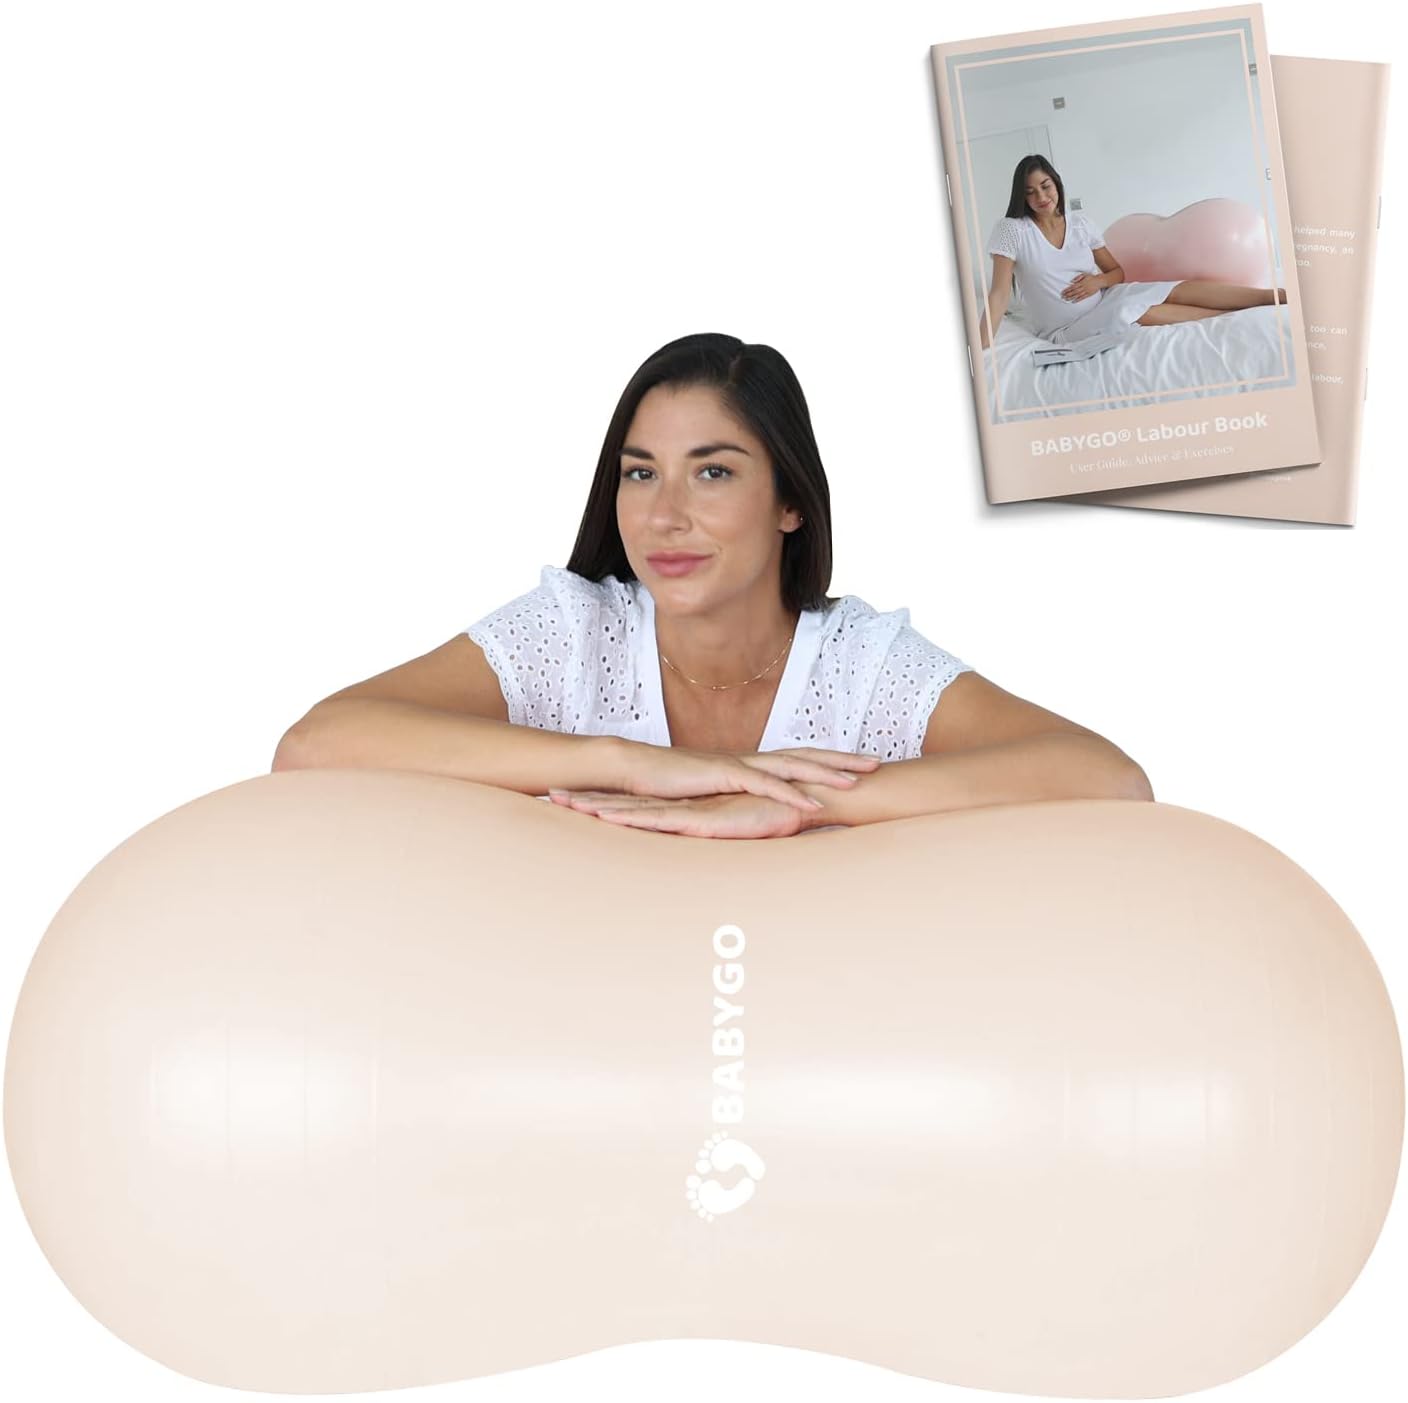 Everything You Need for Your Home Birth